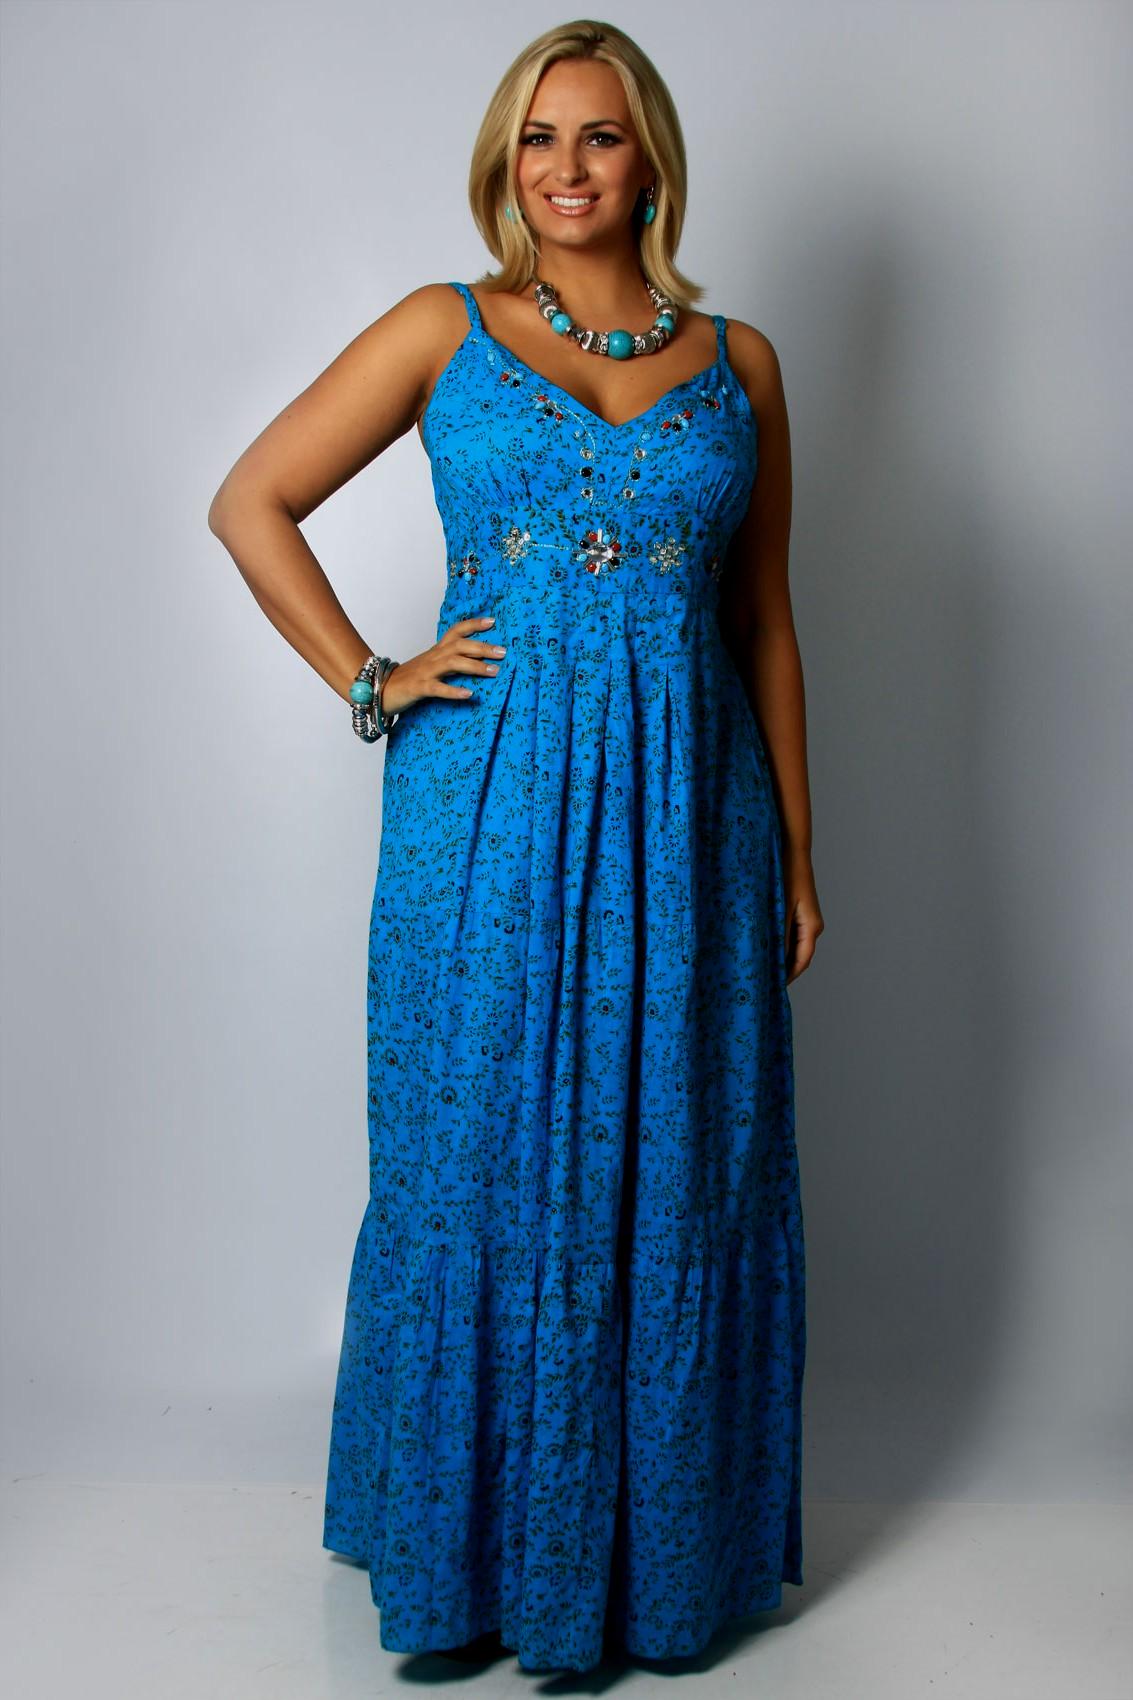 Plus size maxi dresses for summer wedding ...